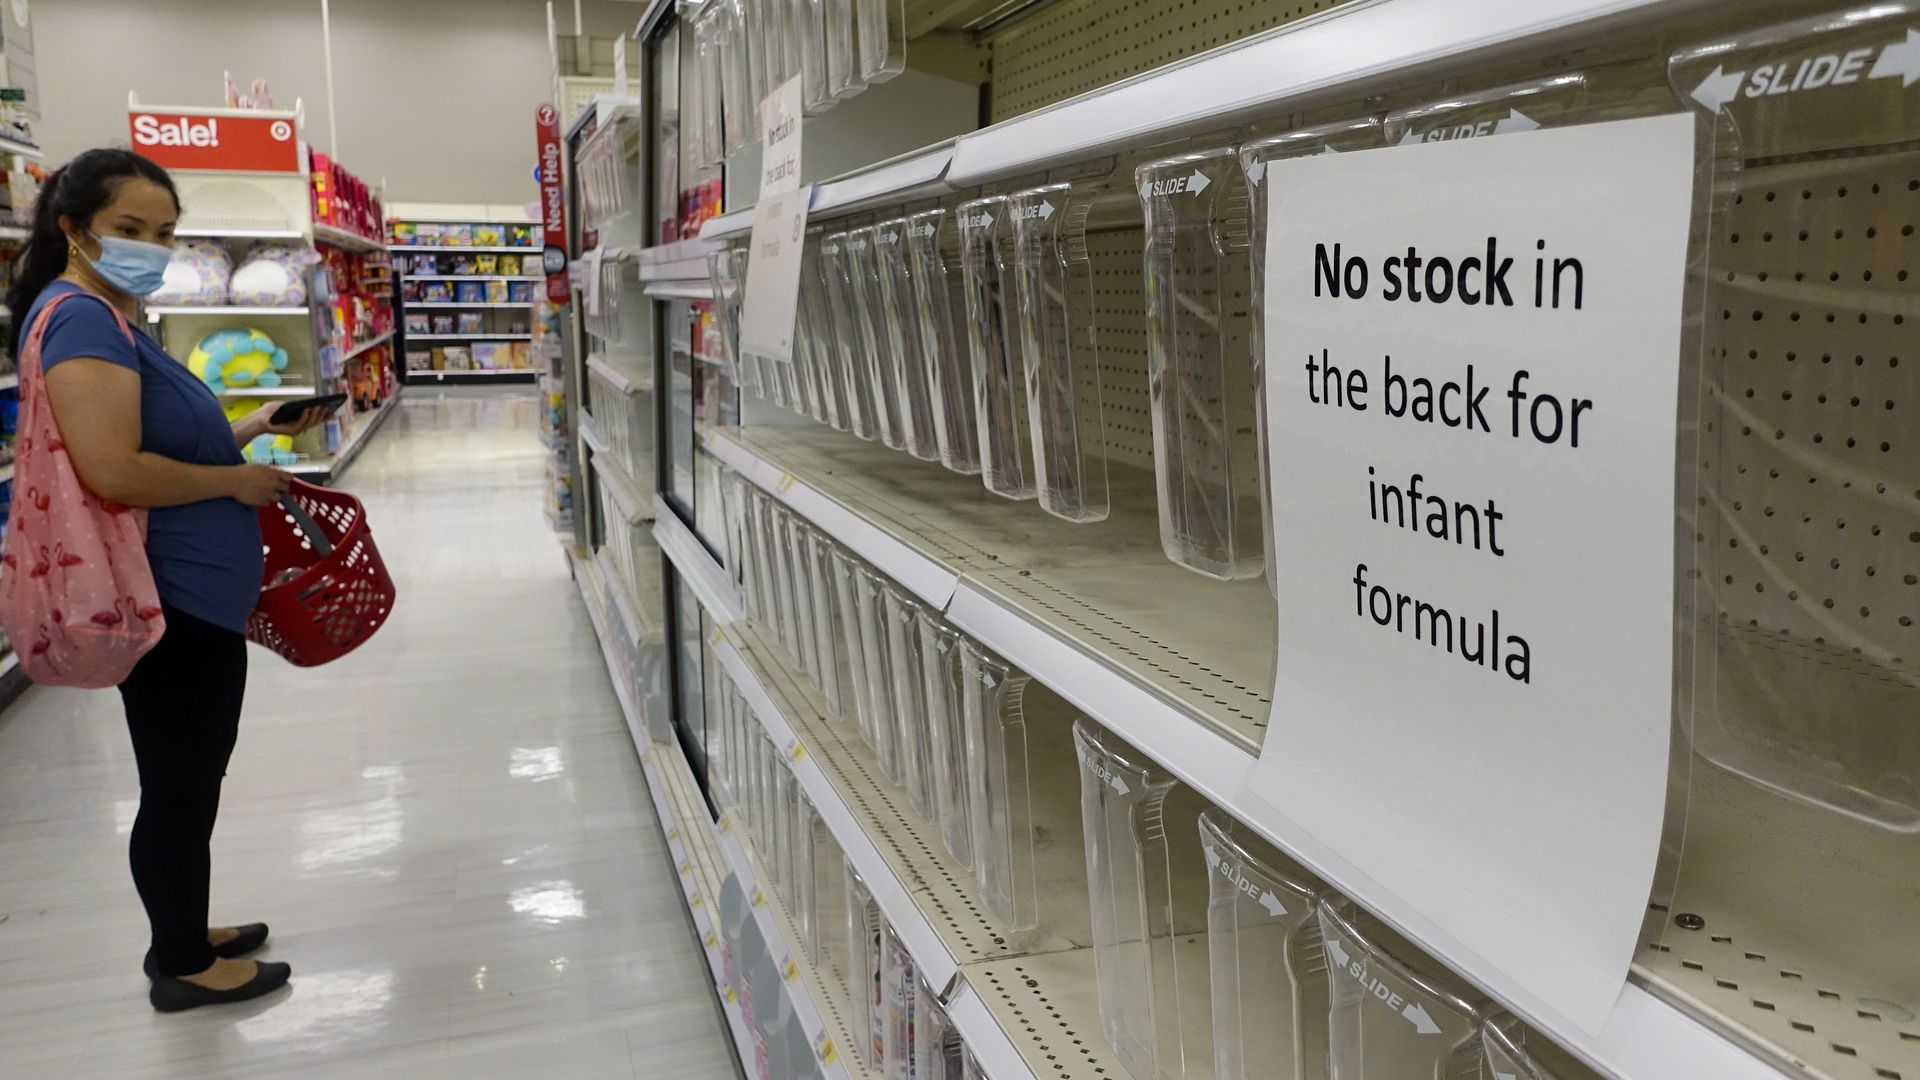  A sign on an empty shelf informs customers that there is no stock in the back for infant formula